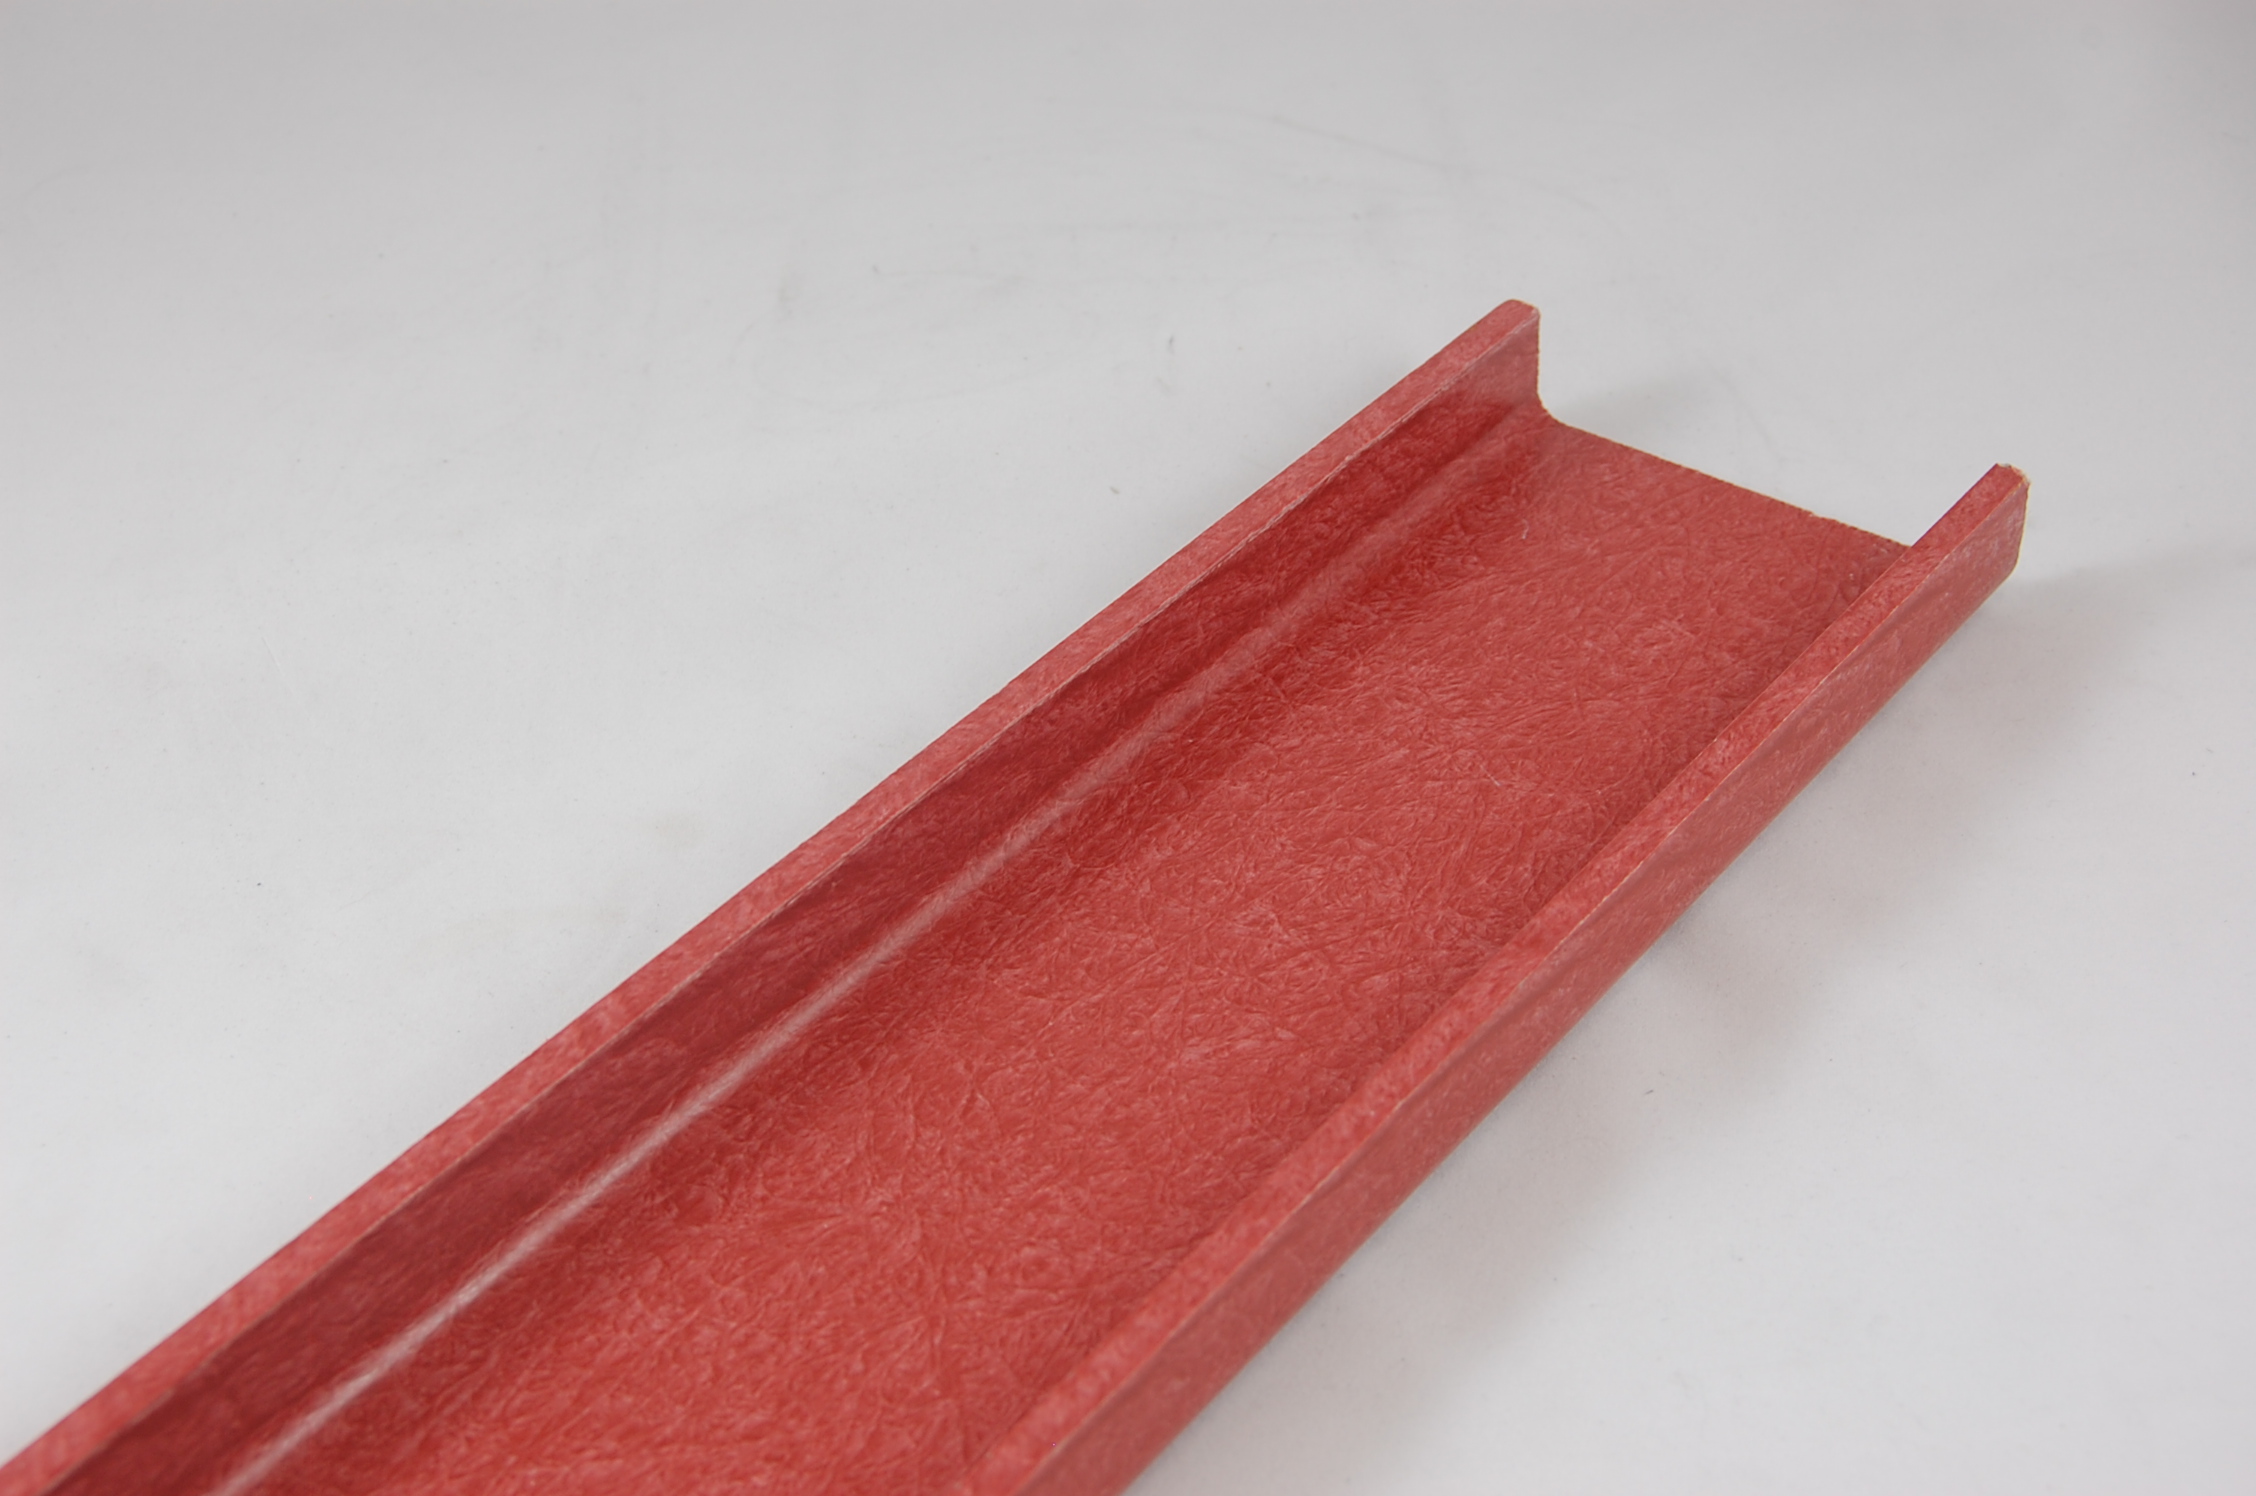 2-9/16"W x 1 7/32" Leg x 1/8" thick GLASROD® Grade 1130 Fiberglass-Reinforced Polyester Laminate Channel, red,  120"L channel